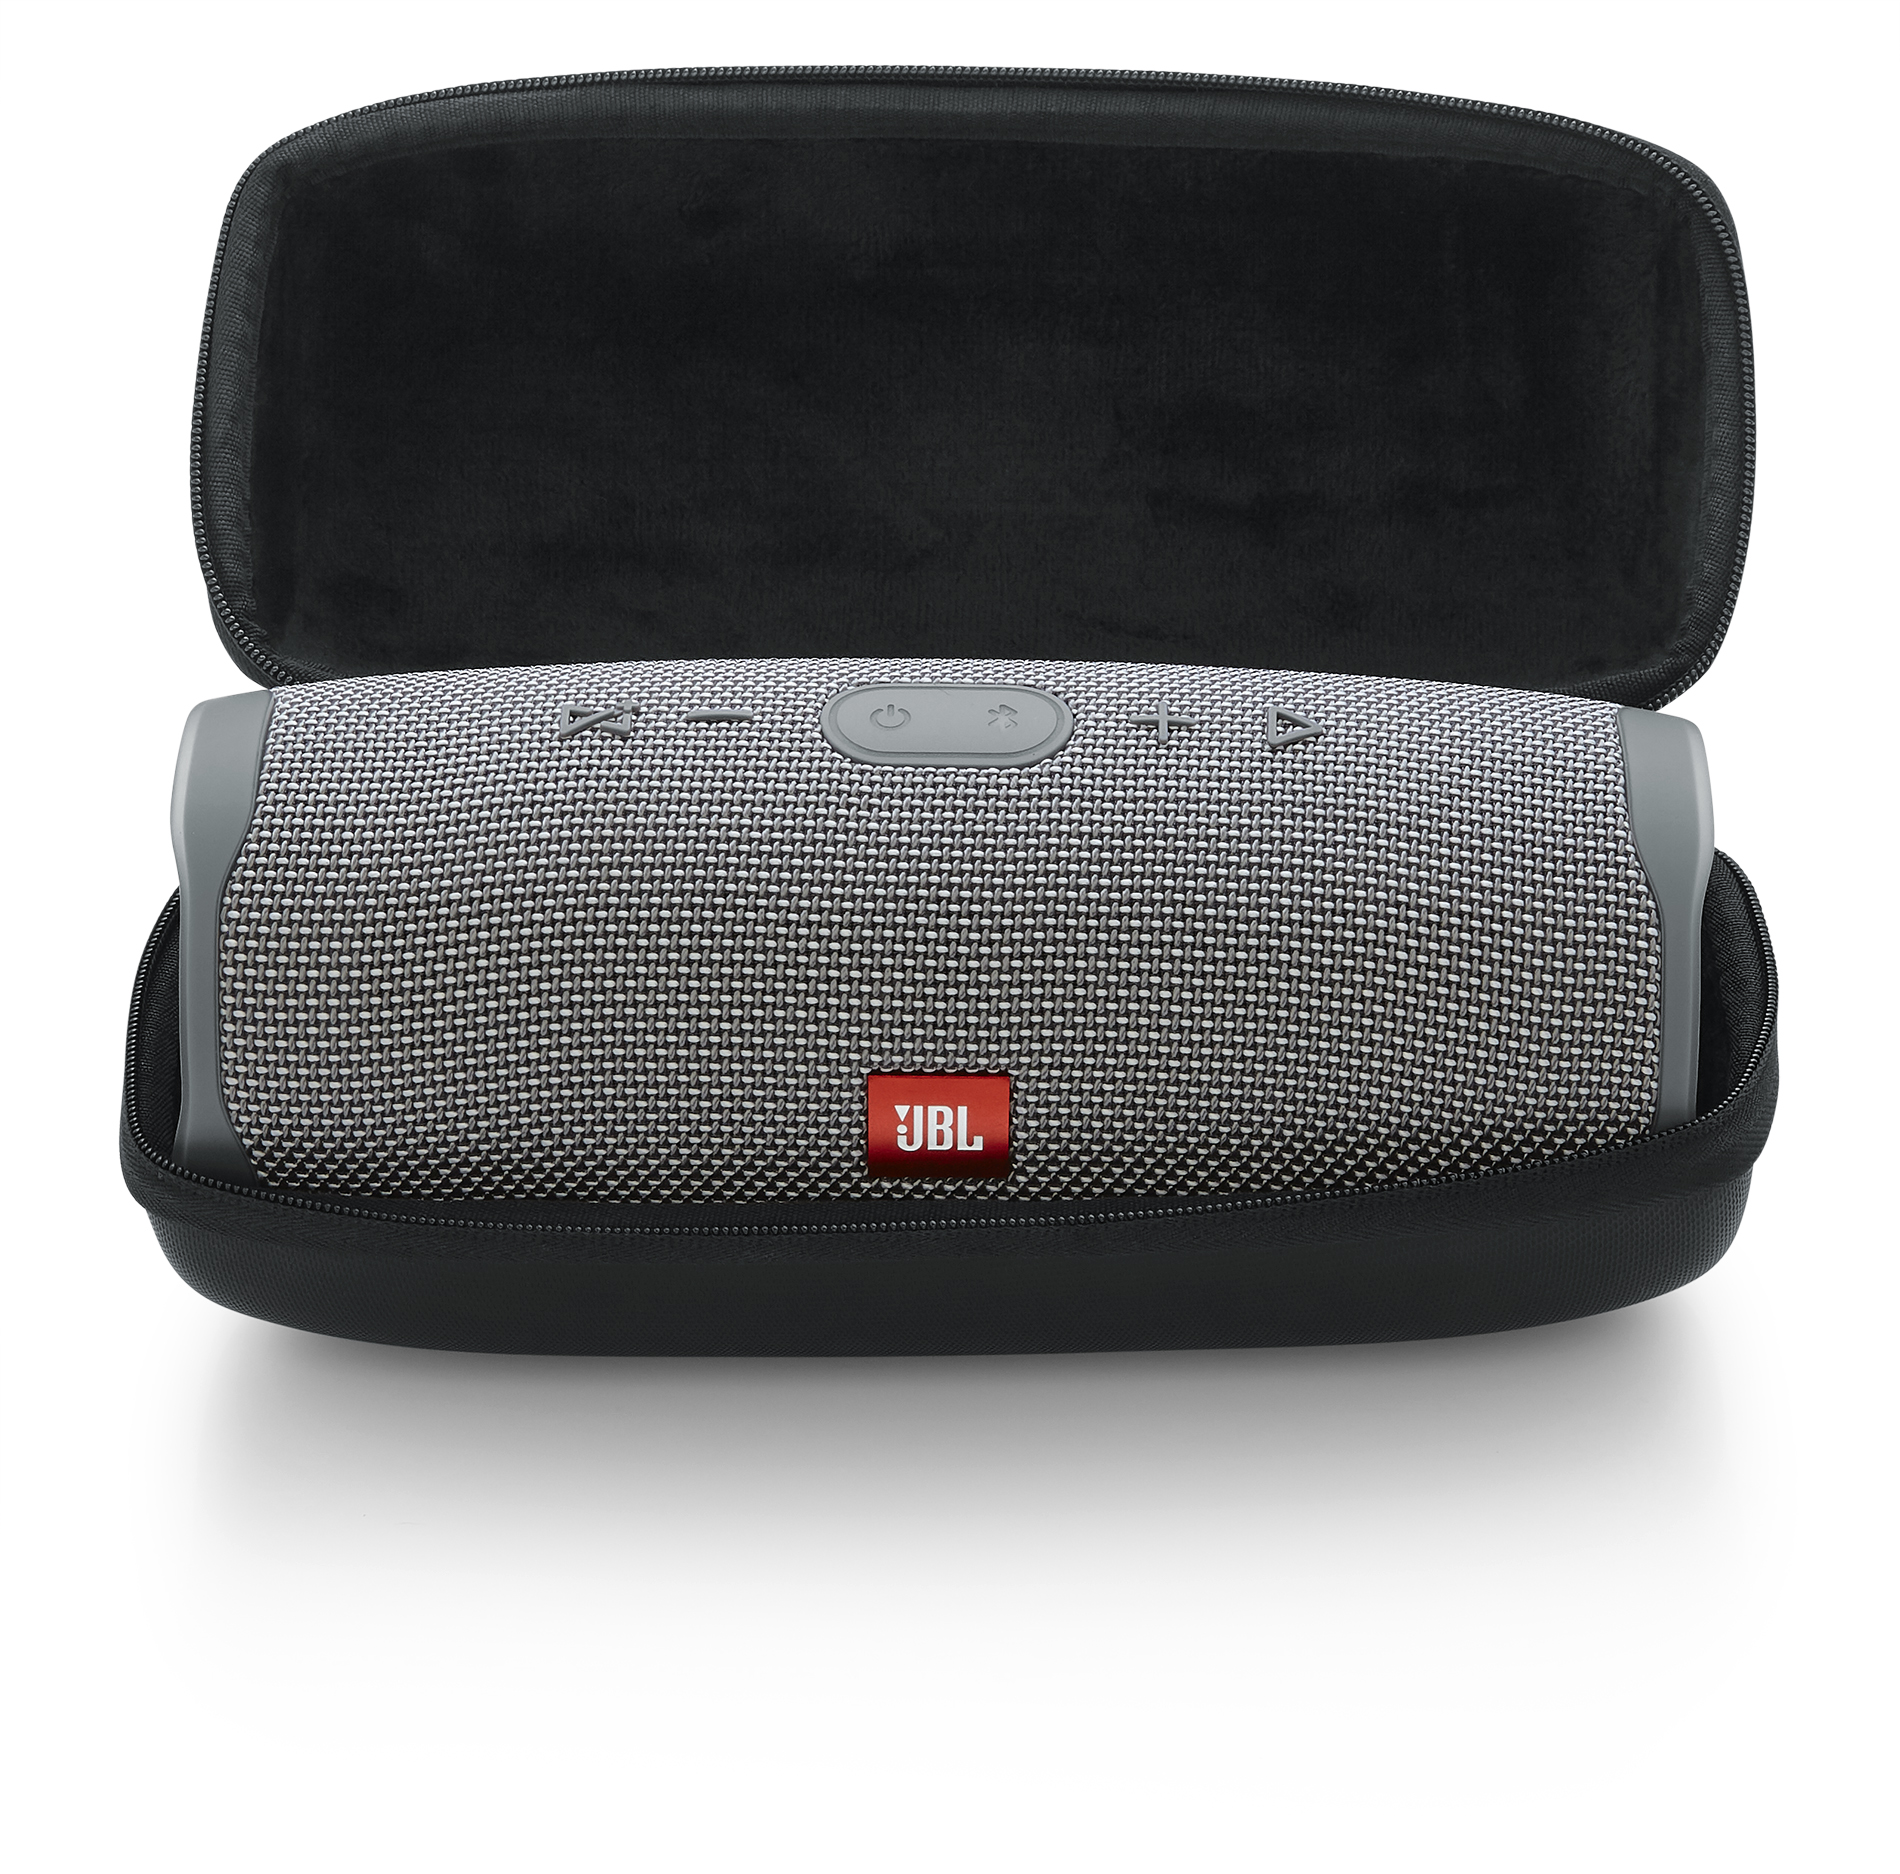 Molded Carry Case For Jbl Charge 4 Speaker – JBL-CHARGE4